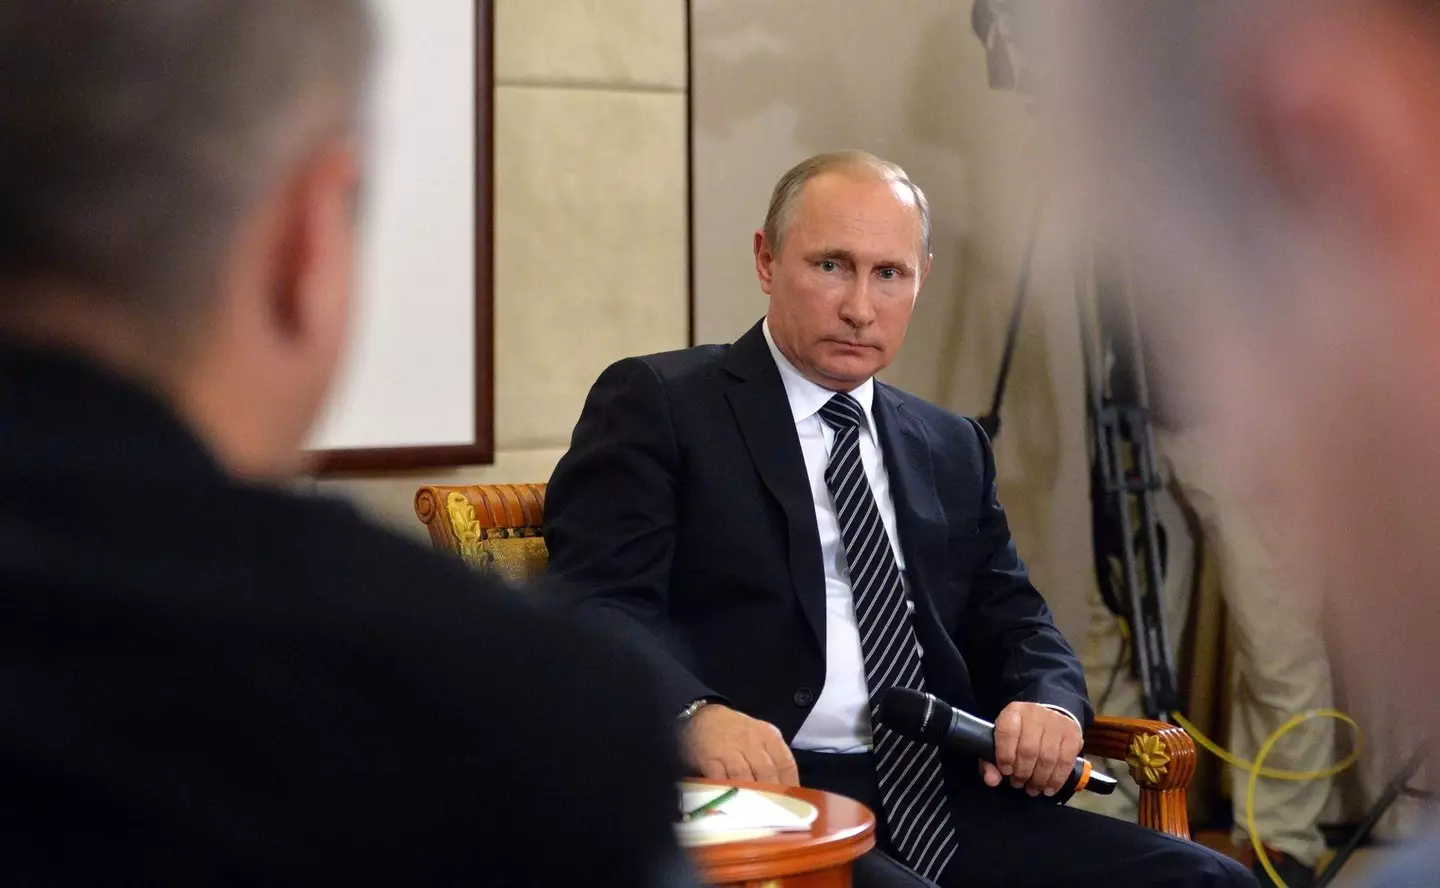 Putin is facing an assassination attempt, security officials claim.